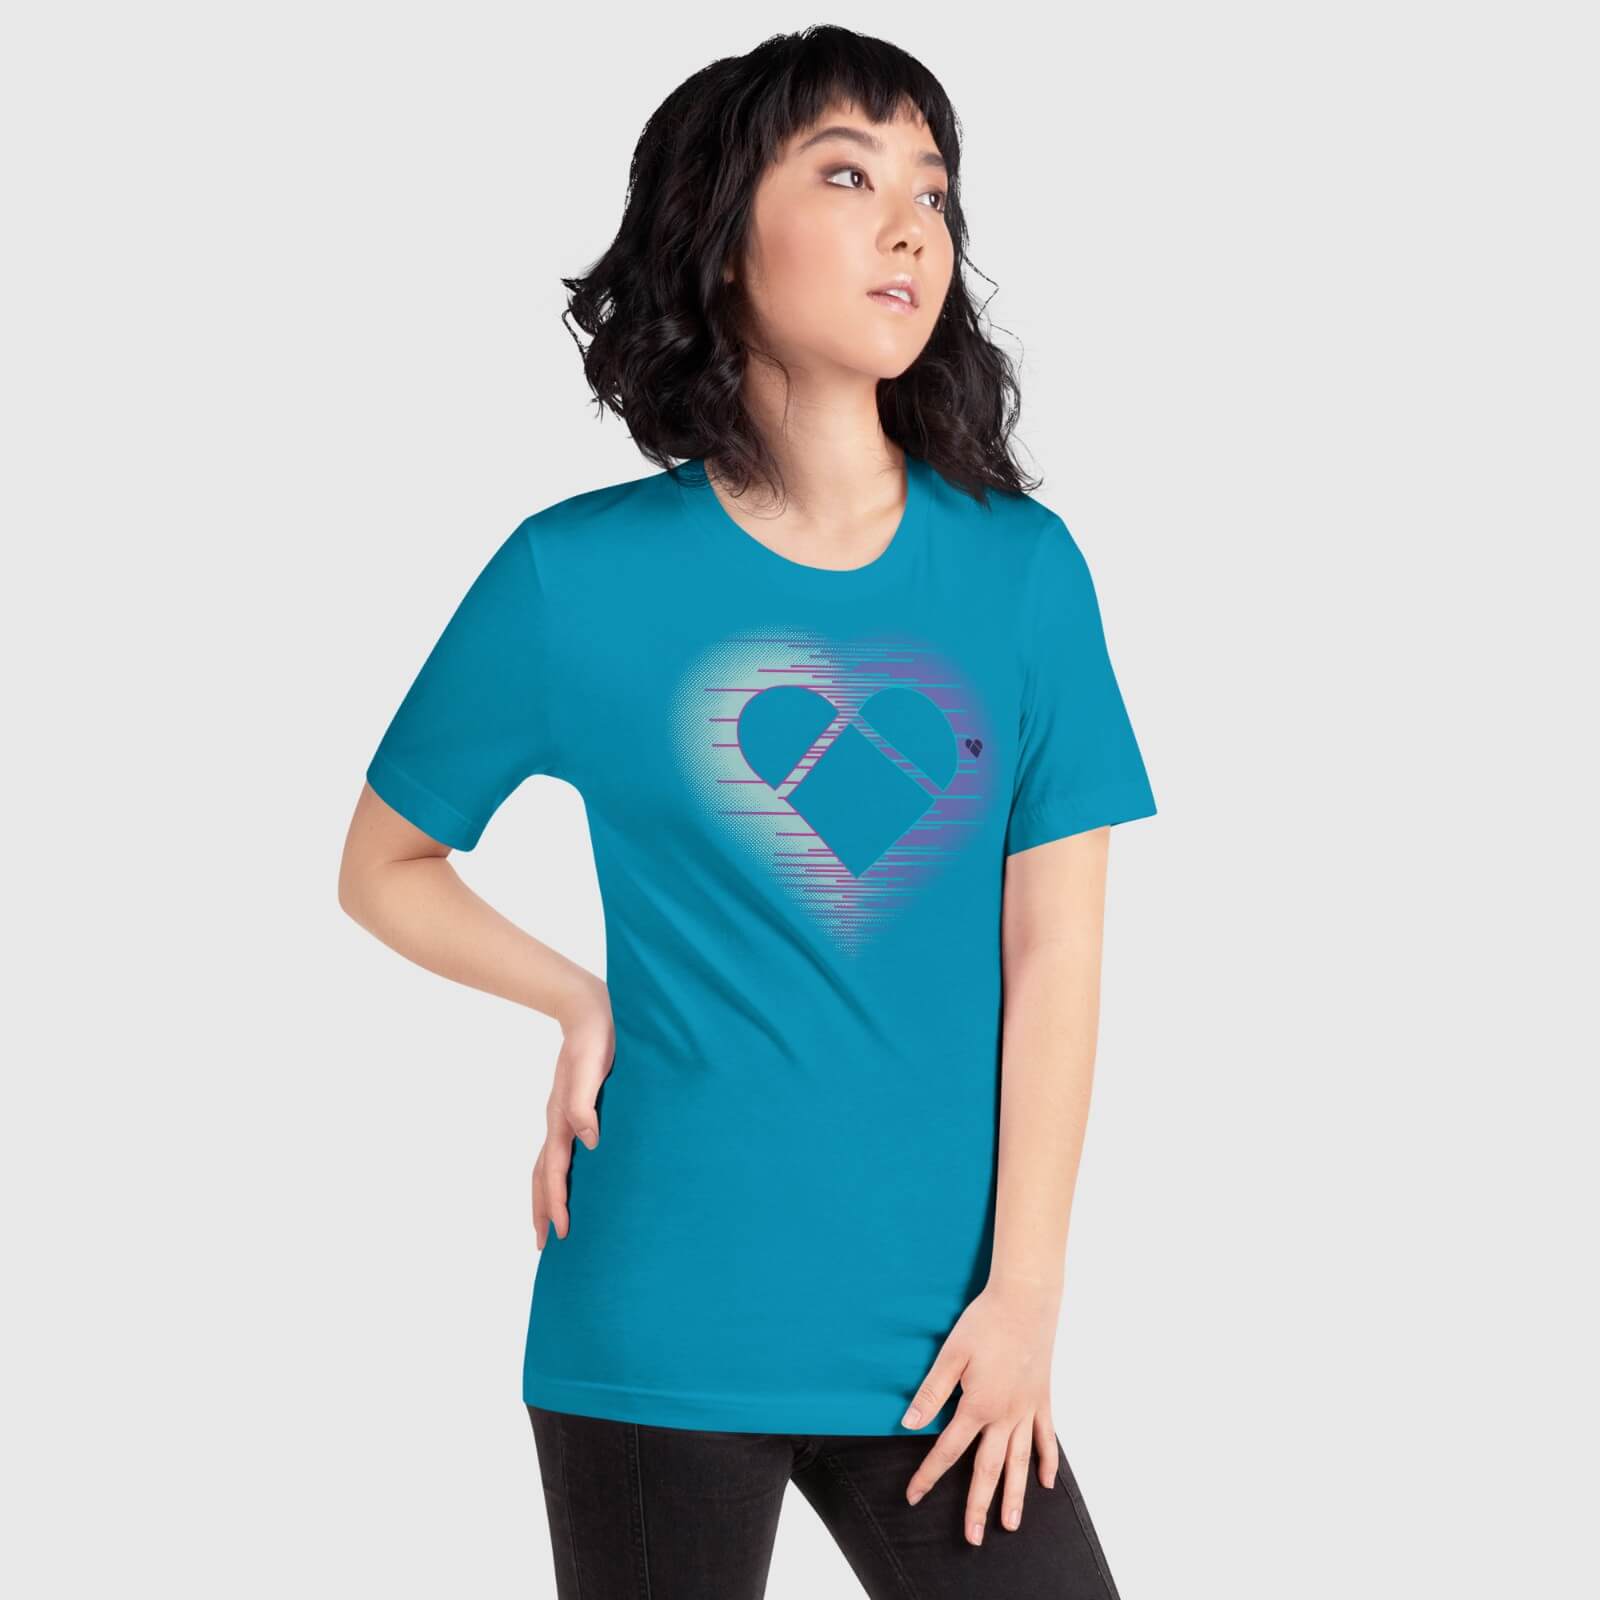 Versatile mint and periwinkle Aqua Tee with heart aura for inclusive fashion by CRiZ AMOR